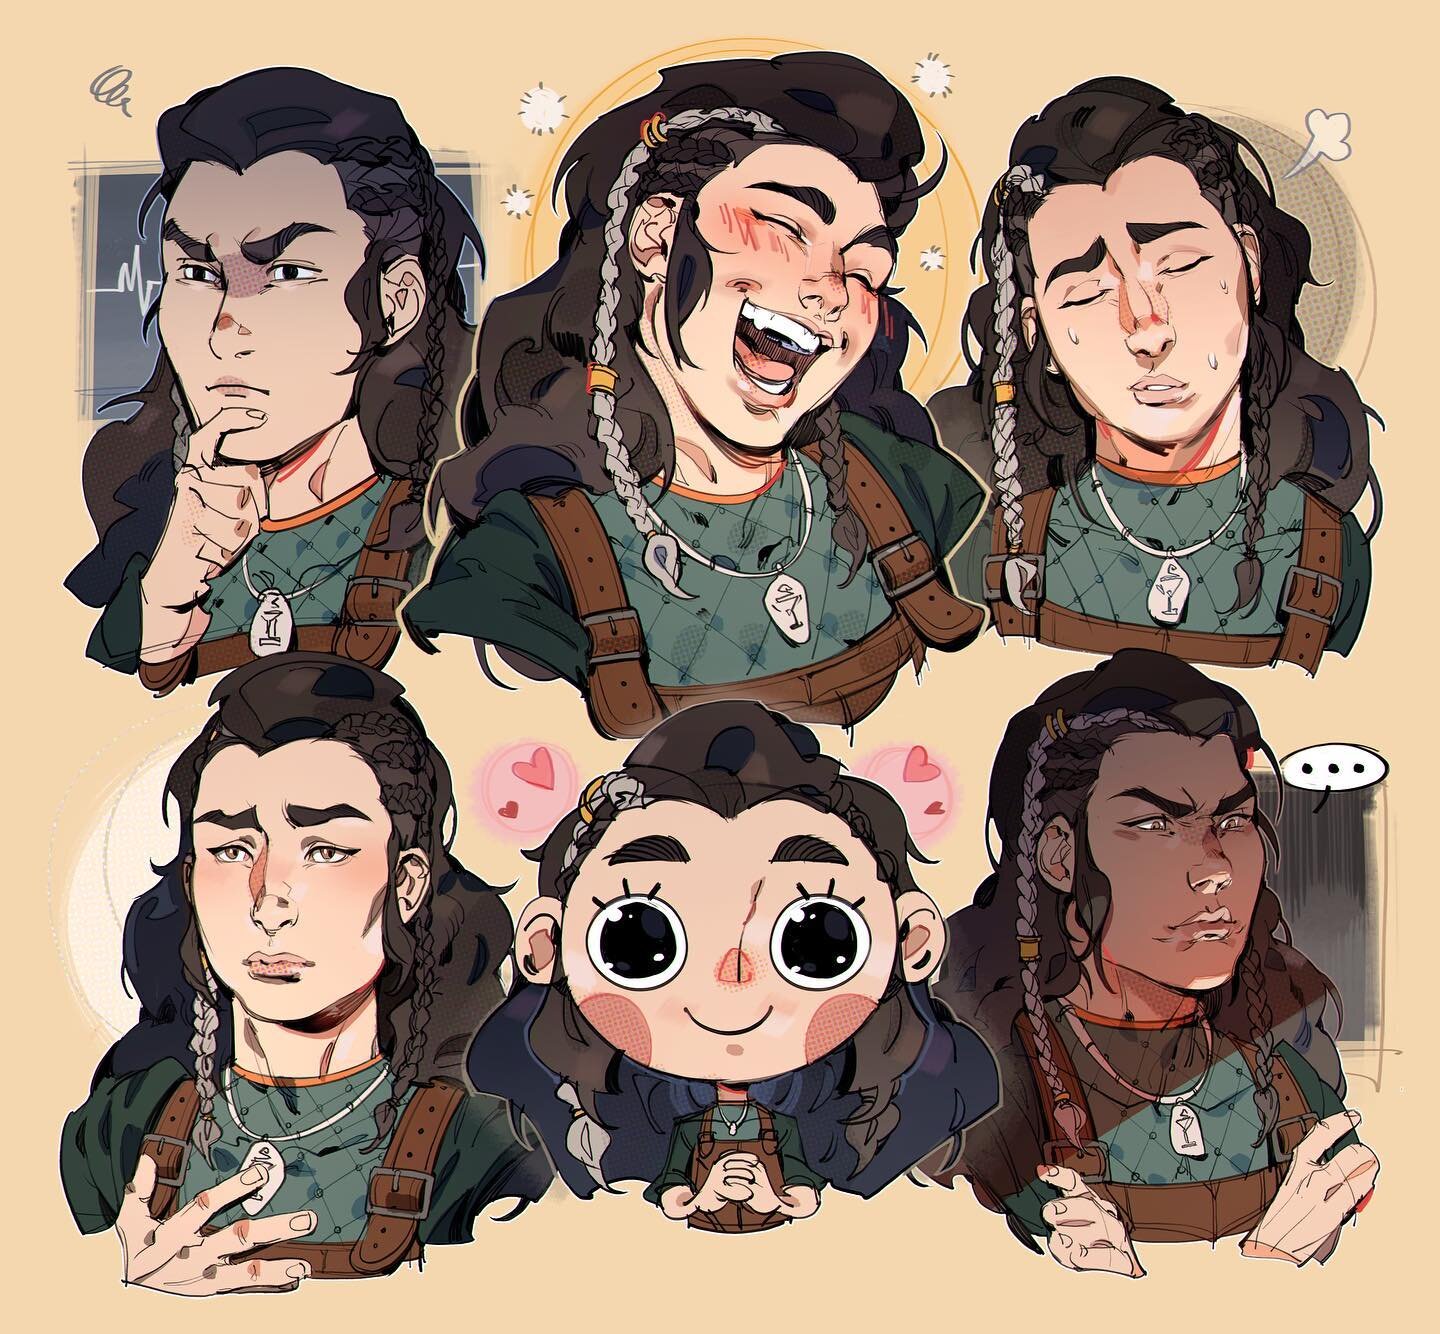 Expression sheet commission for @gibiofficial of @rivvsofficial 's DnD OC, Laslinn! She was so fun to draw 😭💖 
. 
#dnd #oc #digitalart #expressions #commission #originalcharacter #dungeonsanddragons